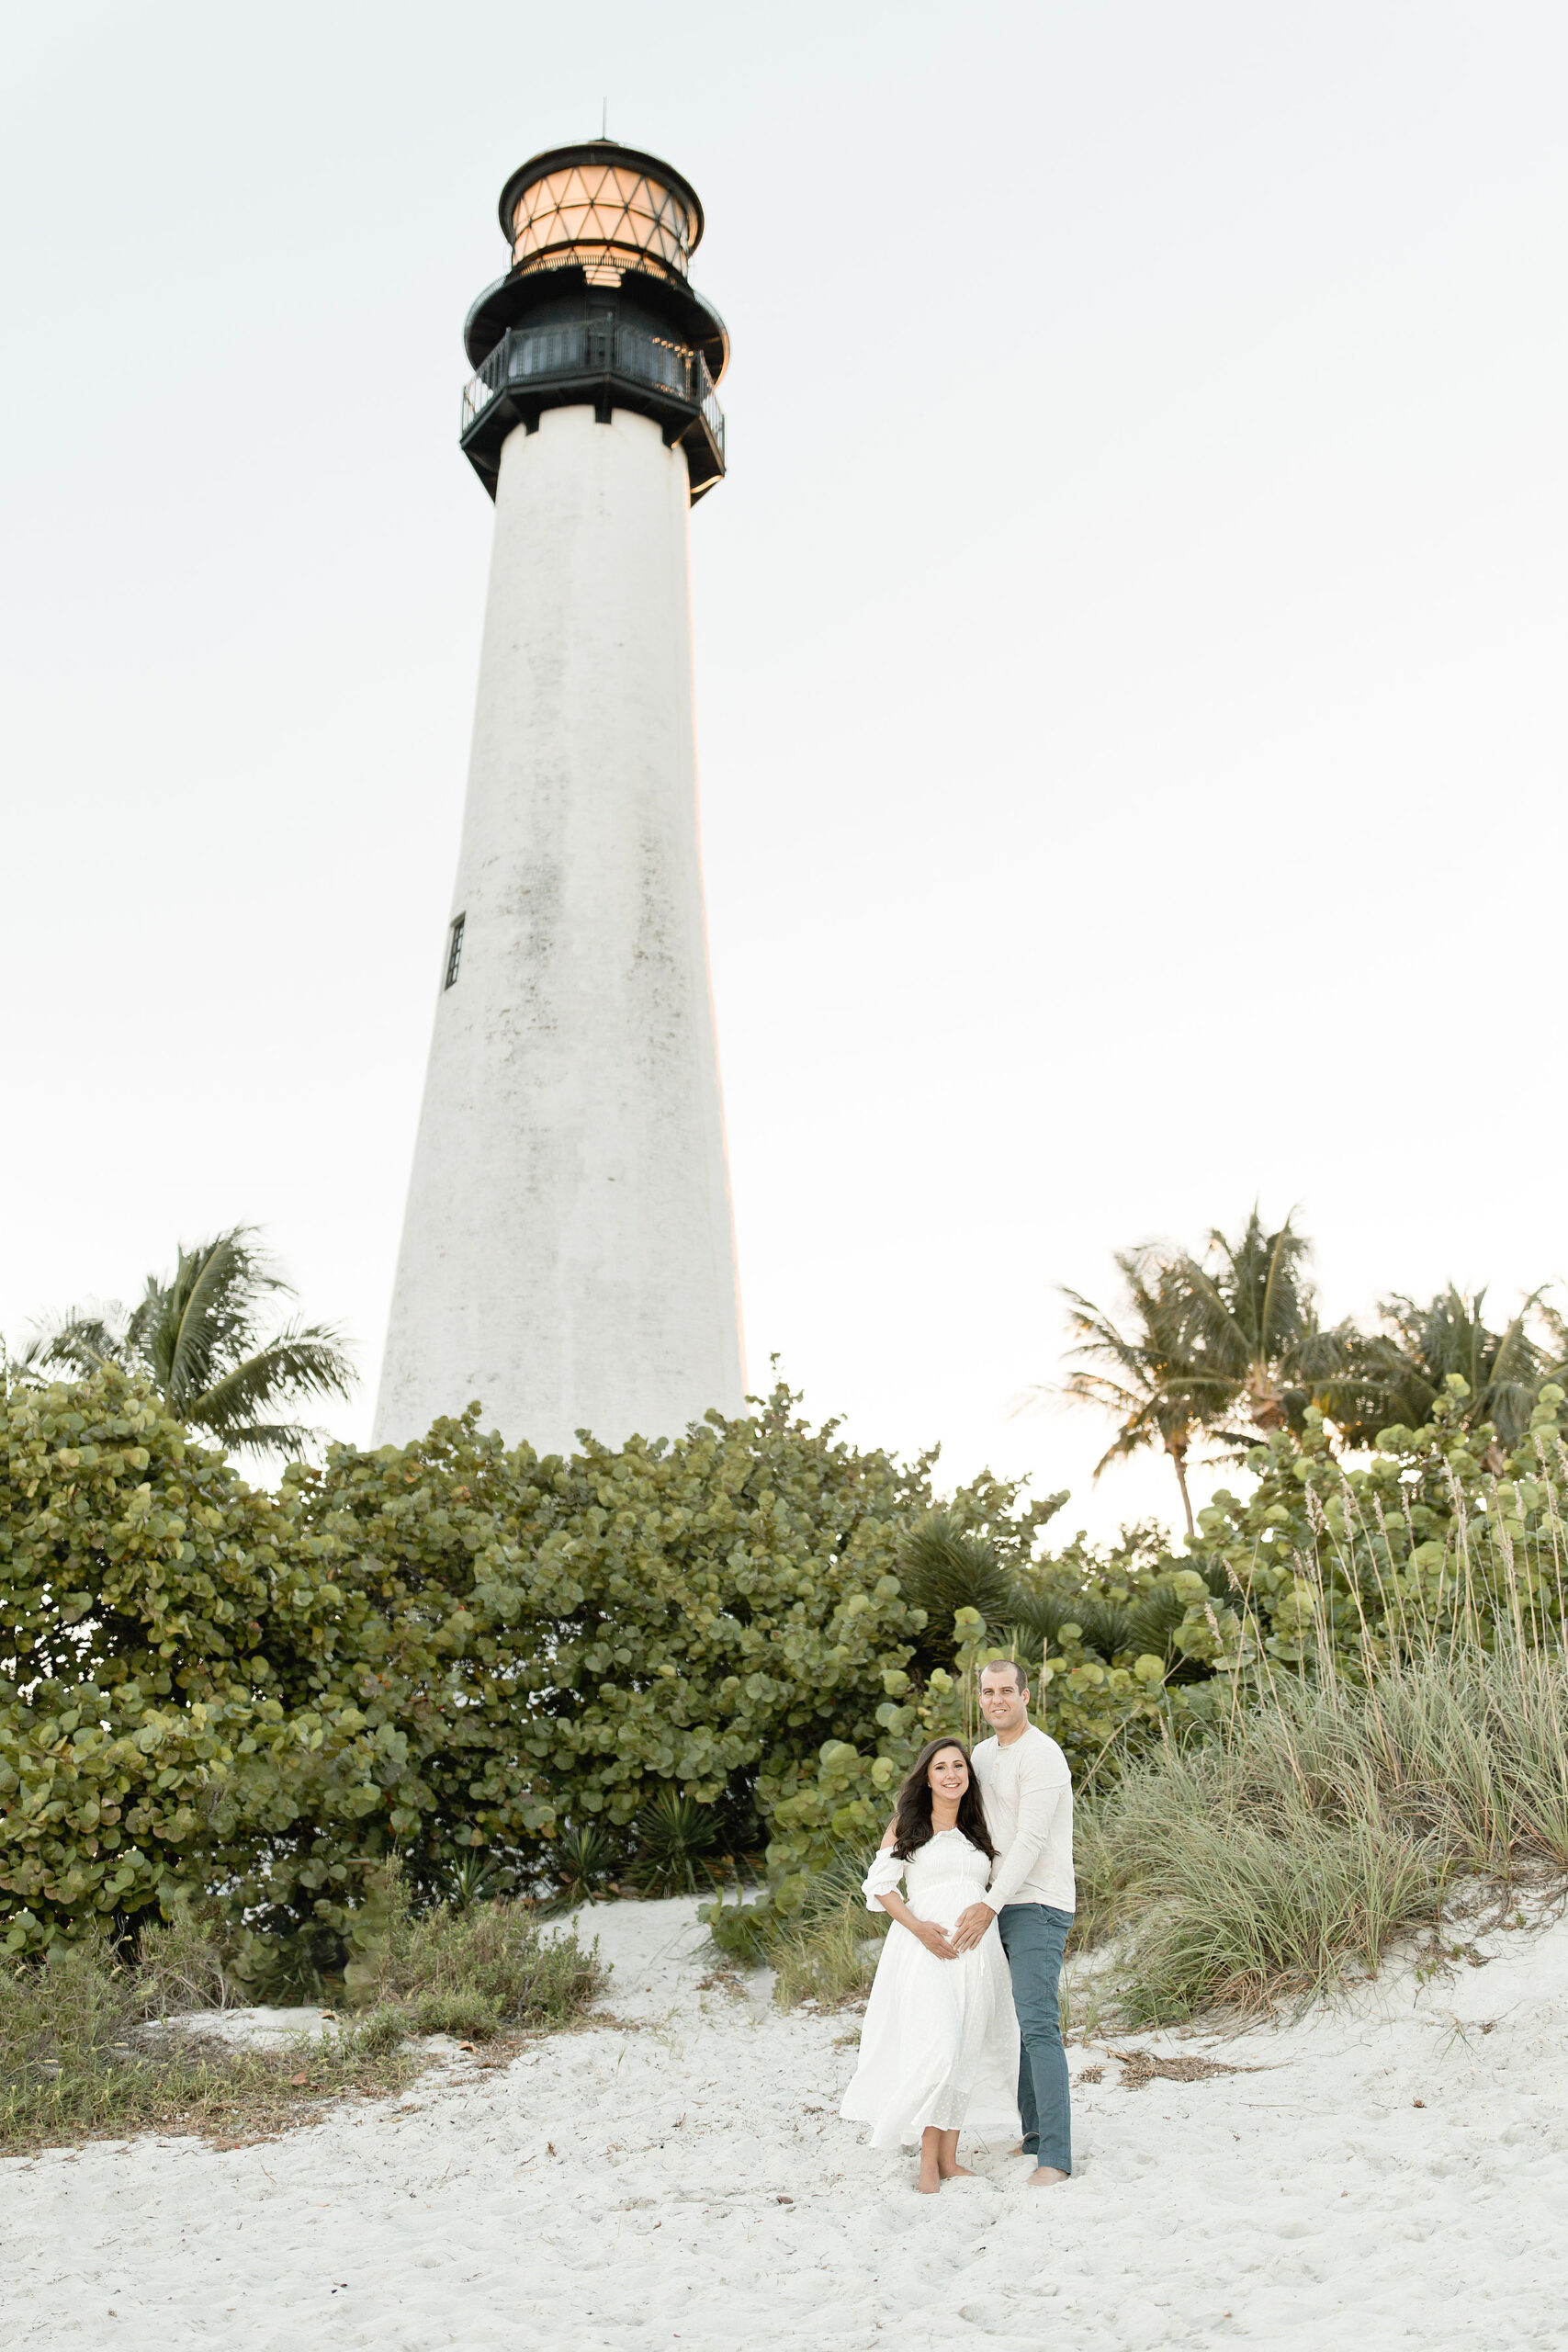 A mom to be in a white dress stands on a beach by the dunes under a lighthouse with her husband after some miami prenatal yoga